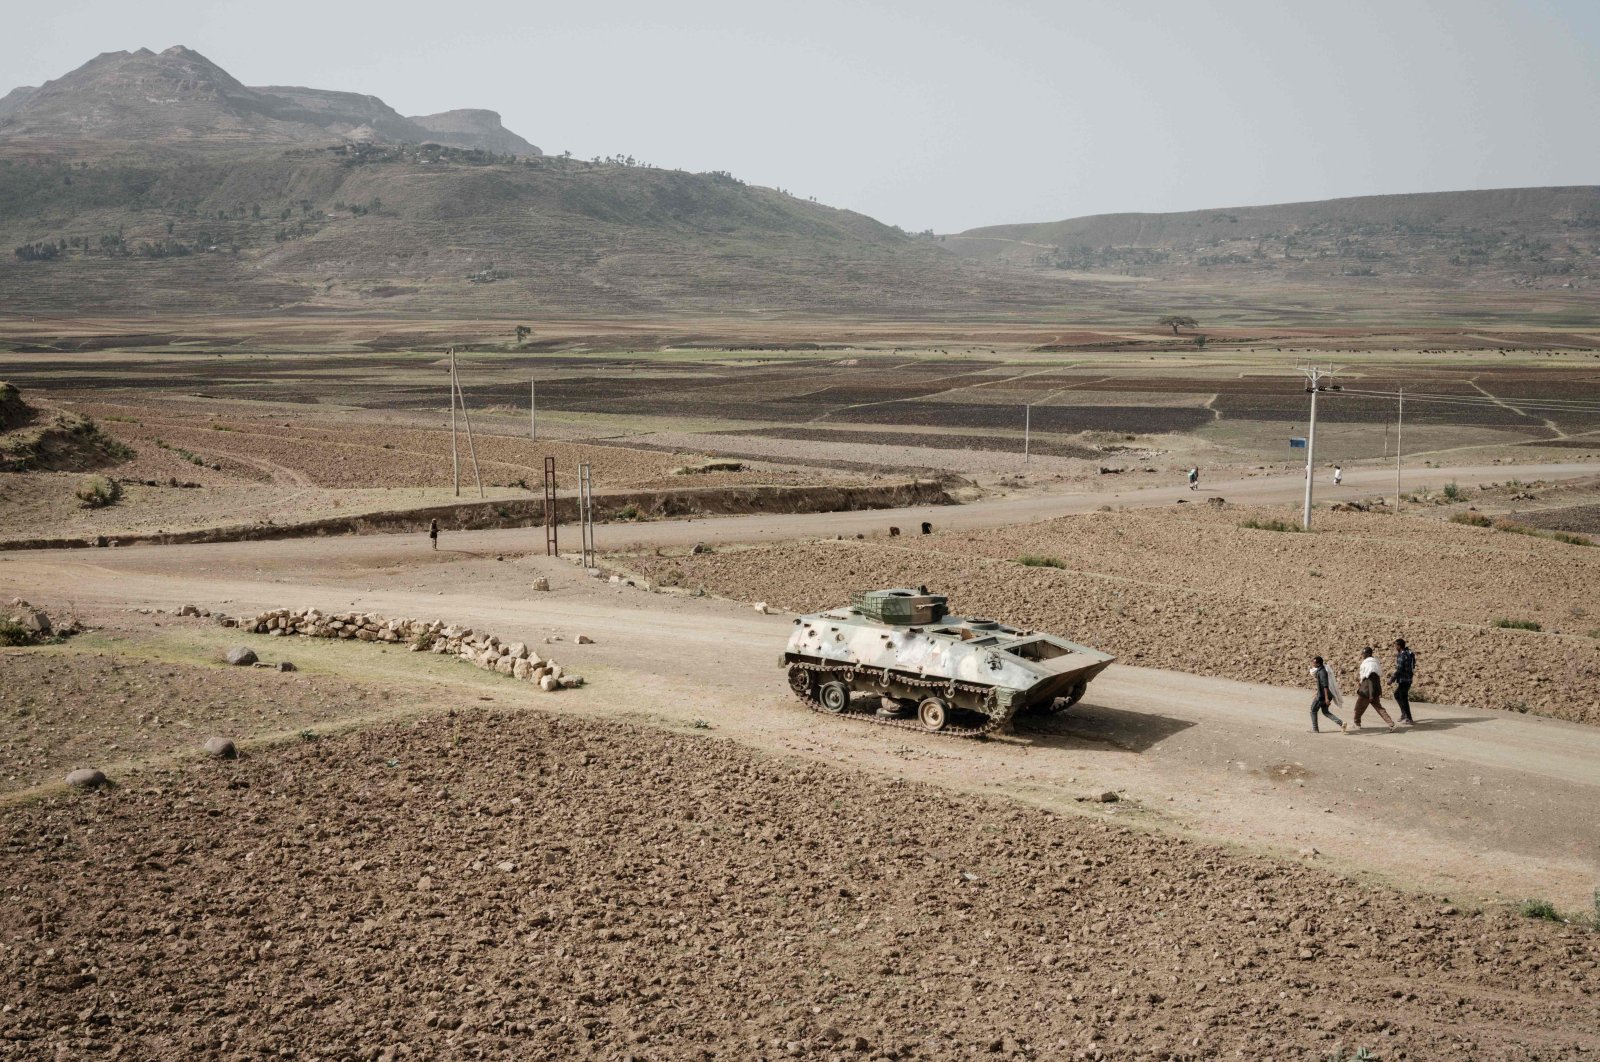 In this file photo taken on June 20, 2021, People walk near a tank of the Ethiopian army abandoned on the road near Dengolat, southwest of Mekele in the Tigray region, Ethiopia. (AFP Photo)